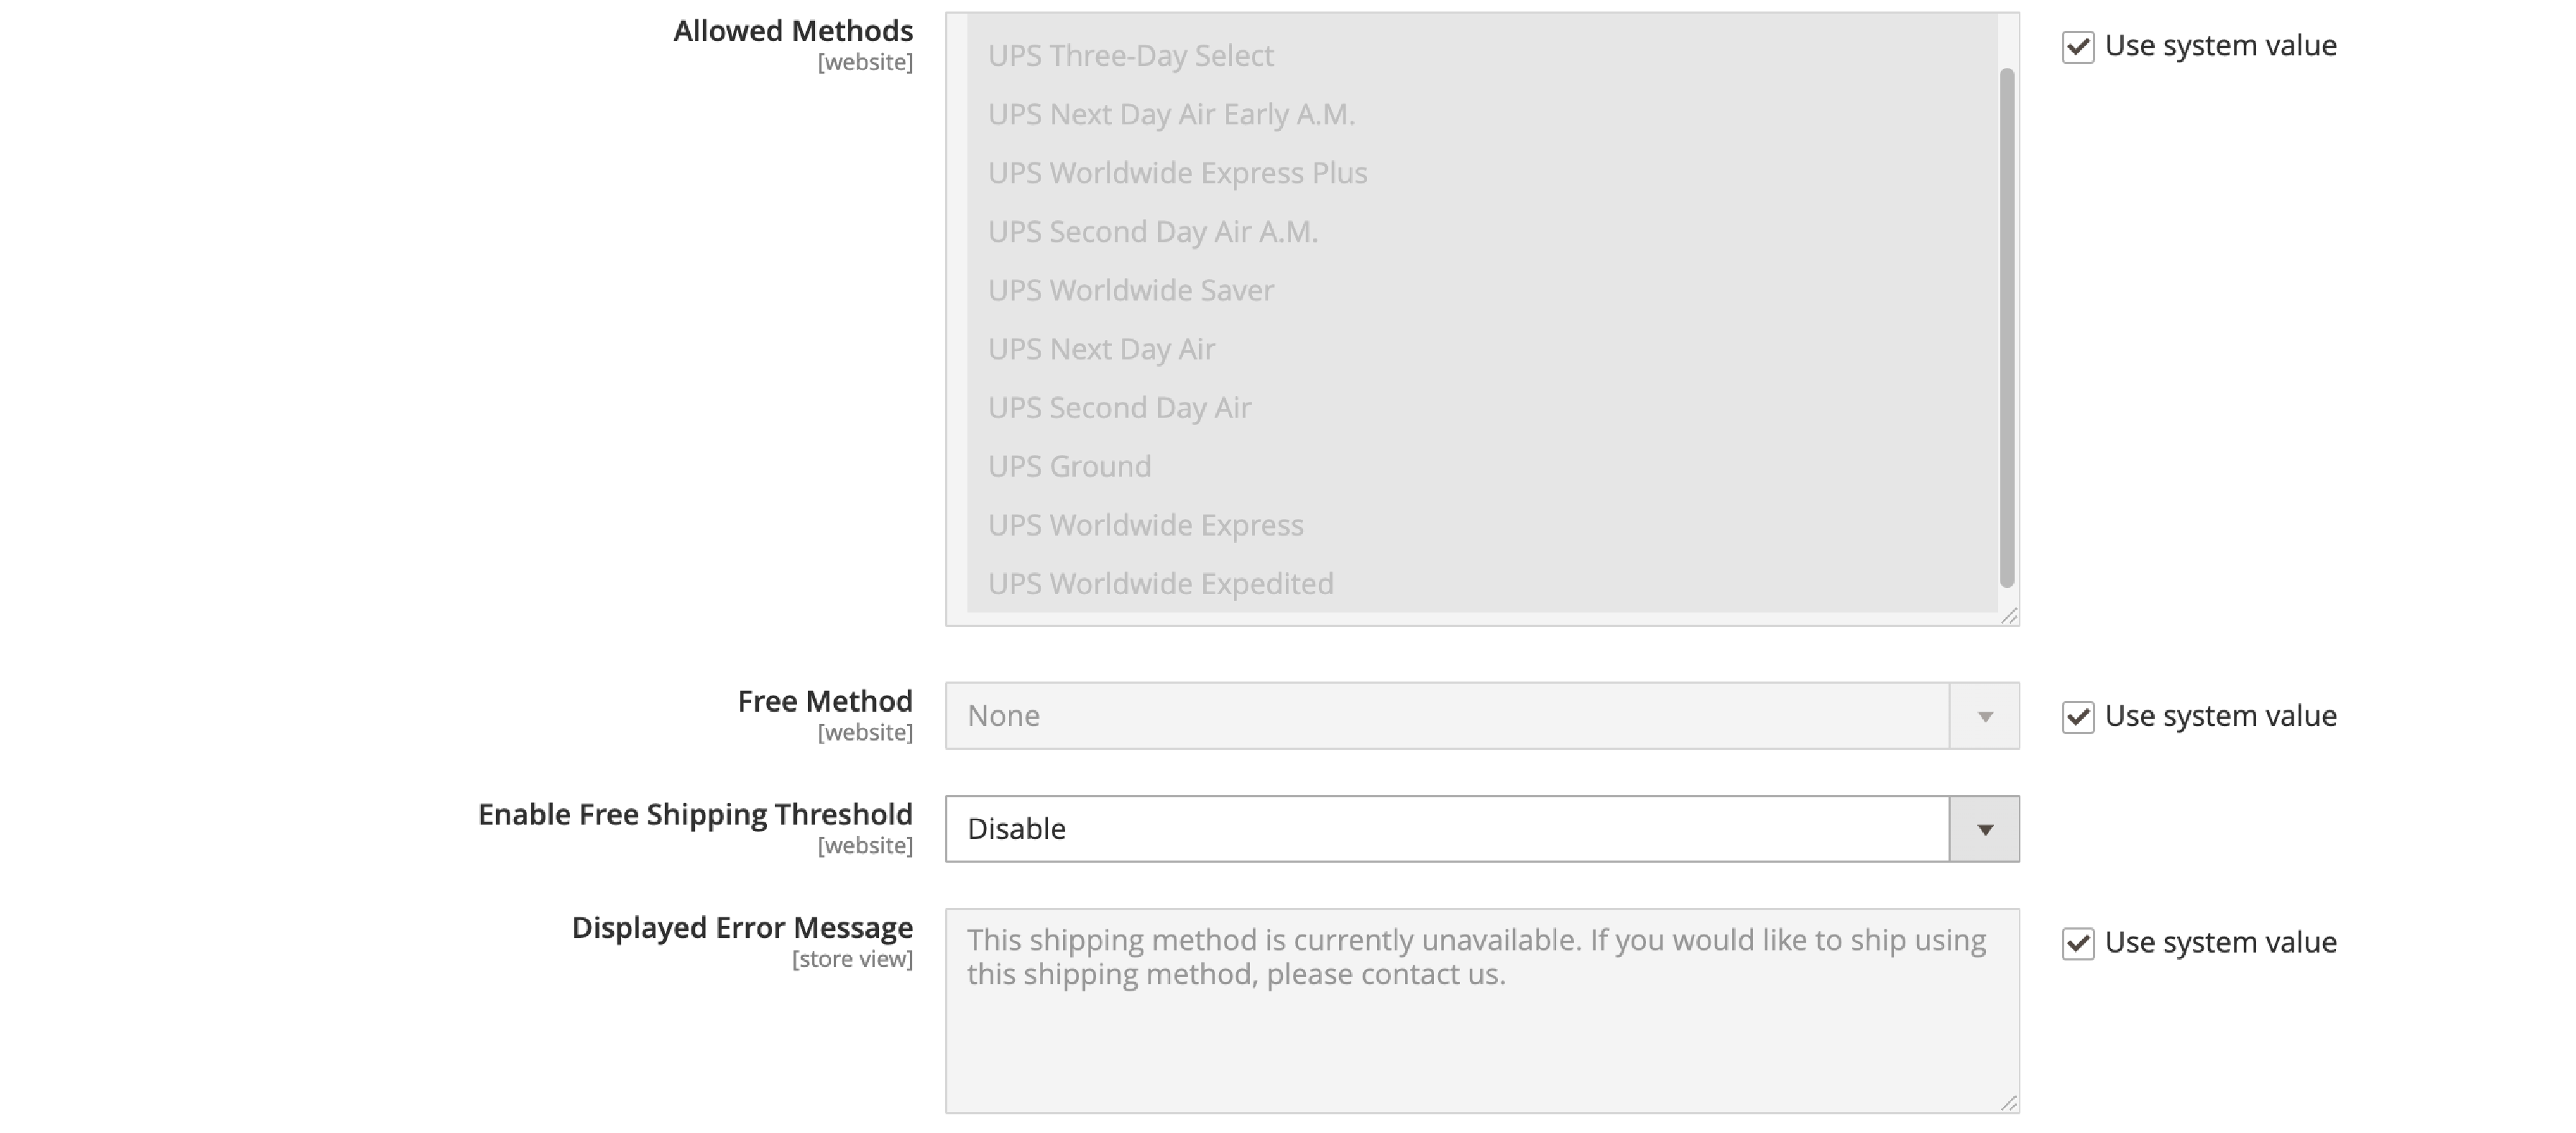 A screenshot of Setting up UPS Allowed Methods in Magento 2